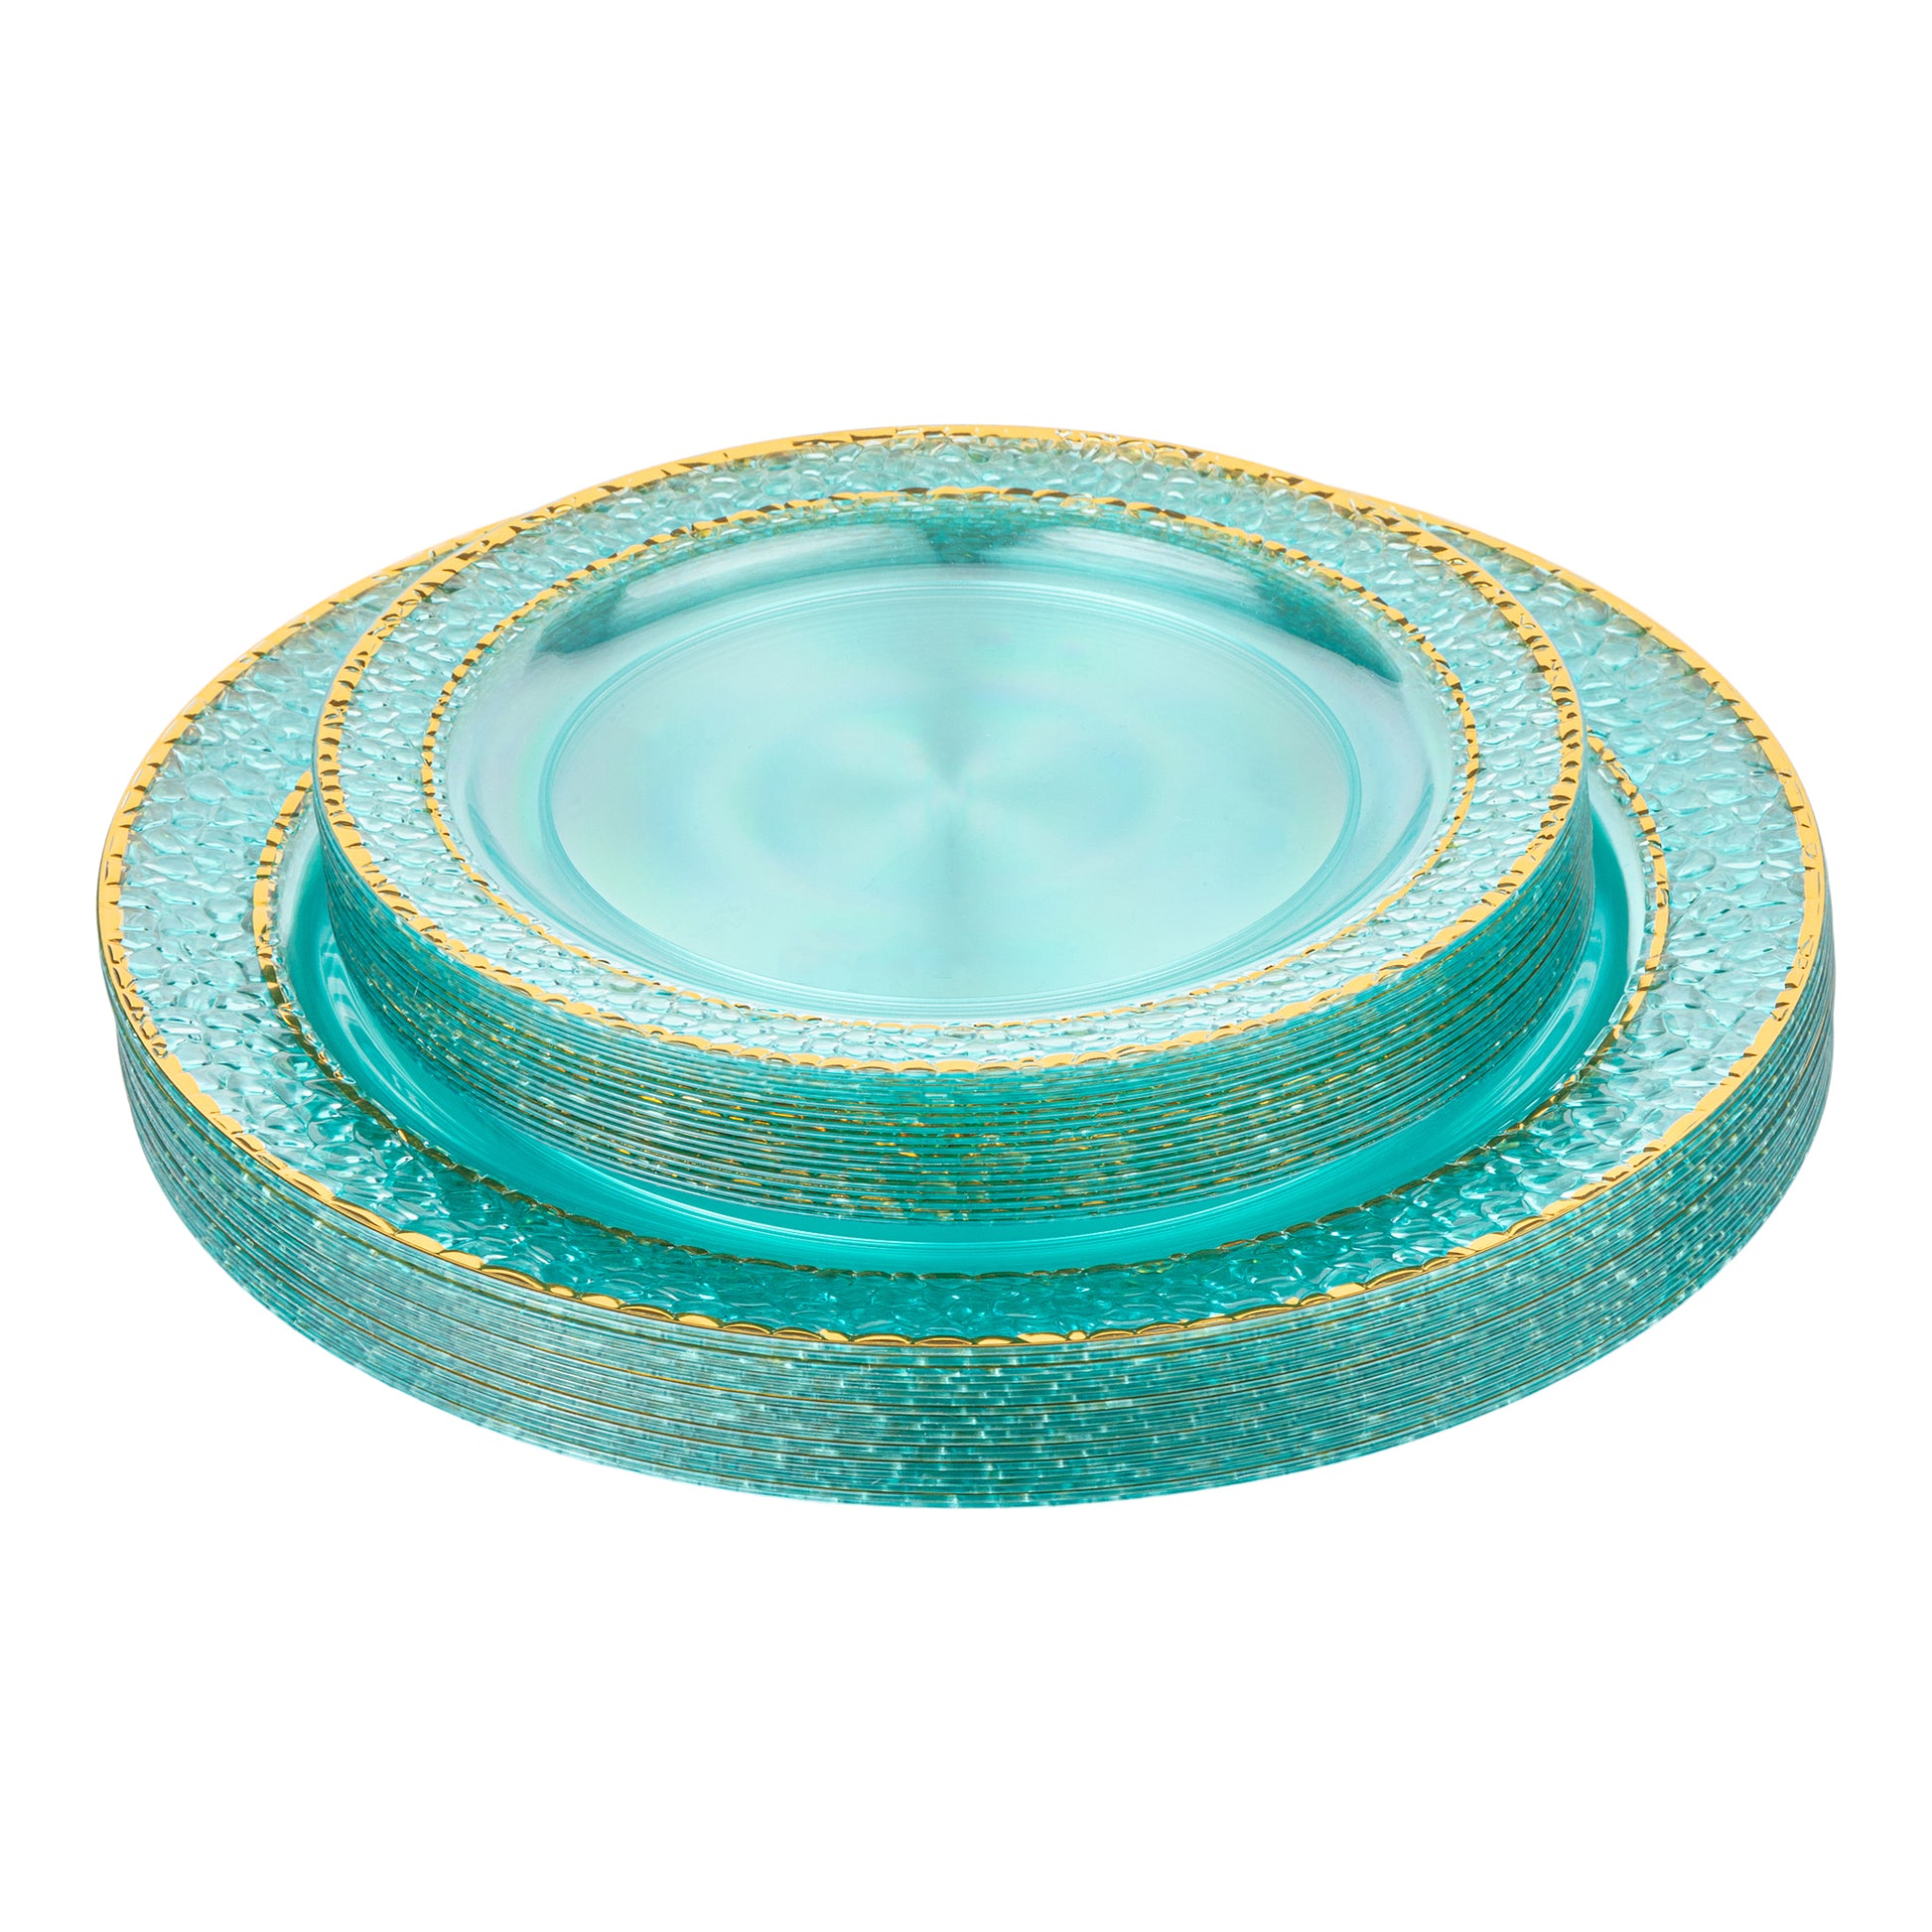 Stylish And Unique Disposable Plates With Lid For Events 